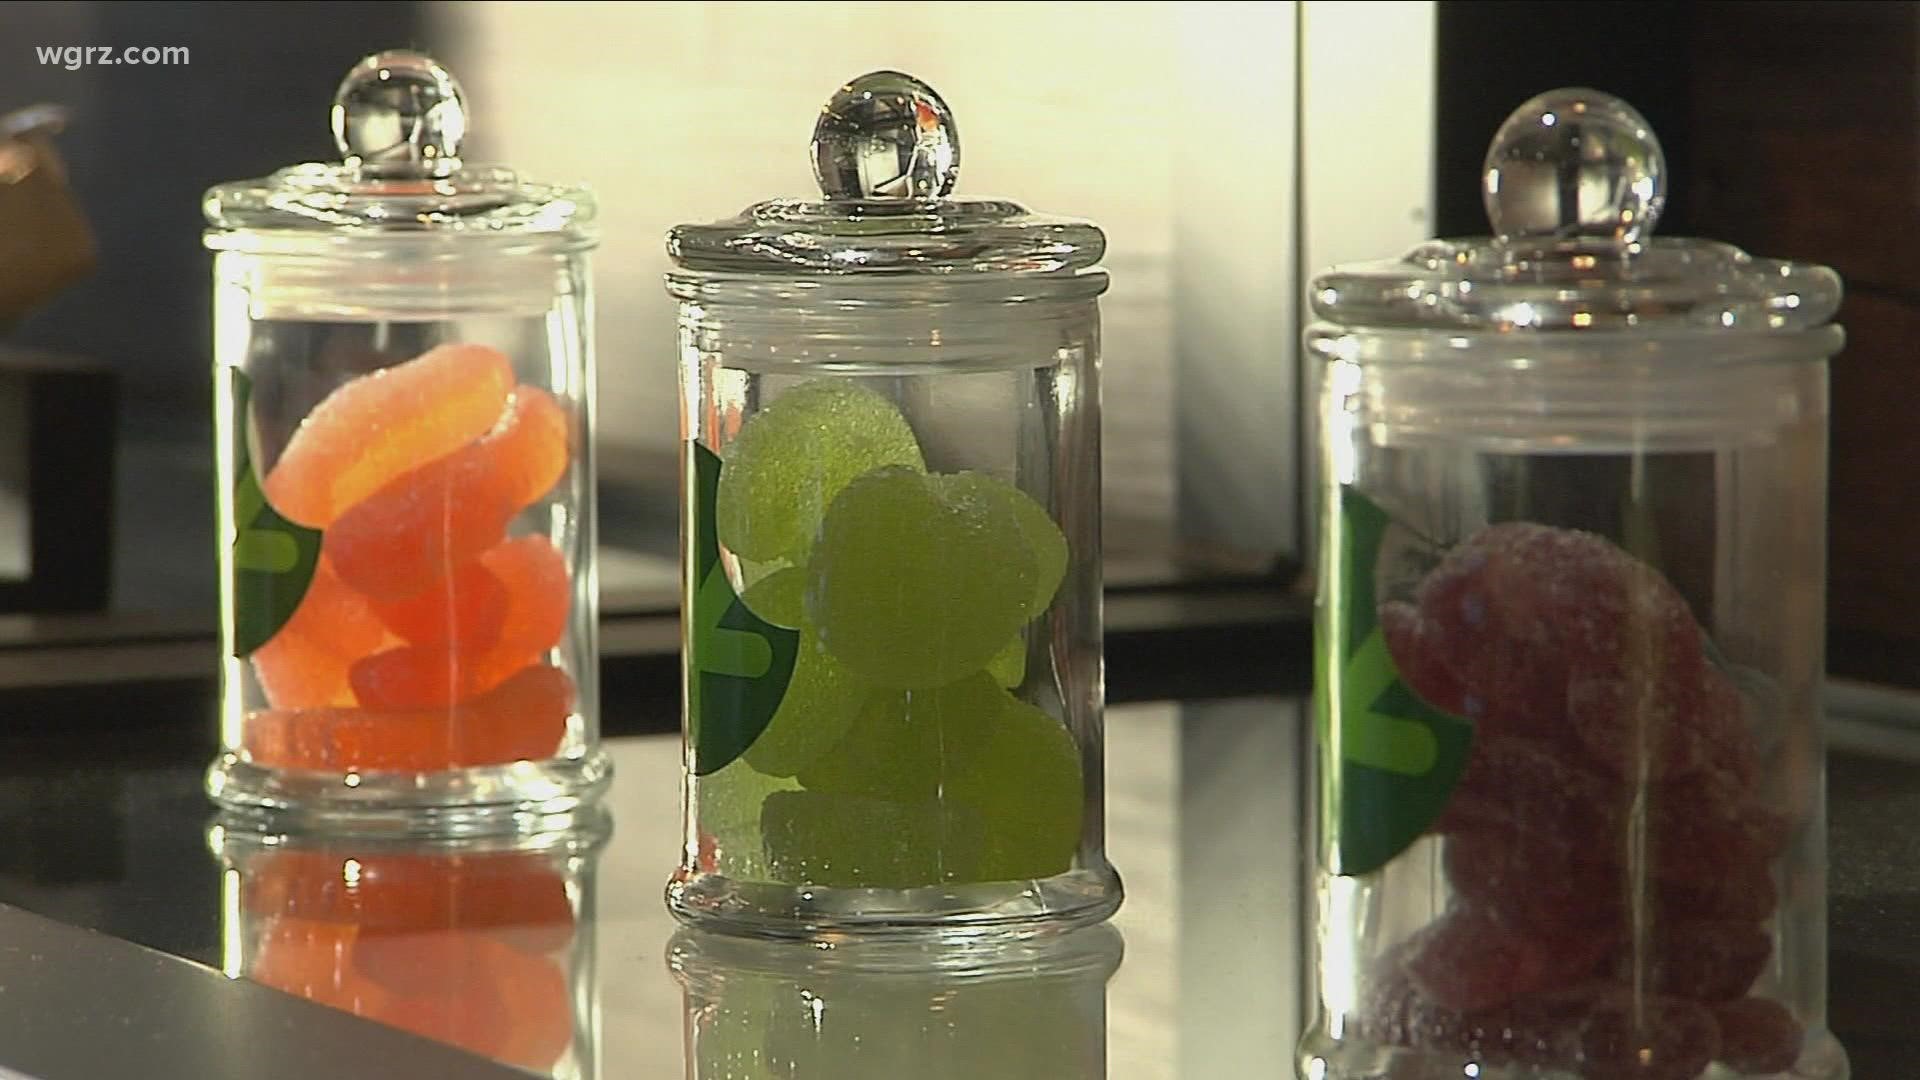 Catt Co. concerns about edibles and children